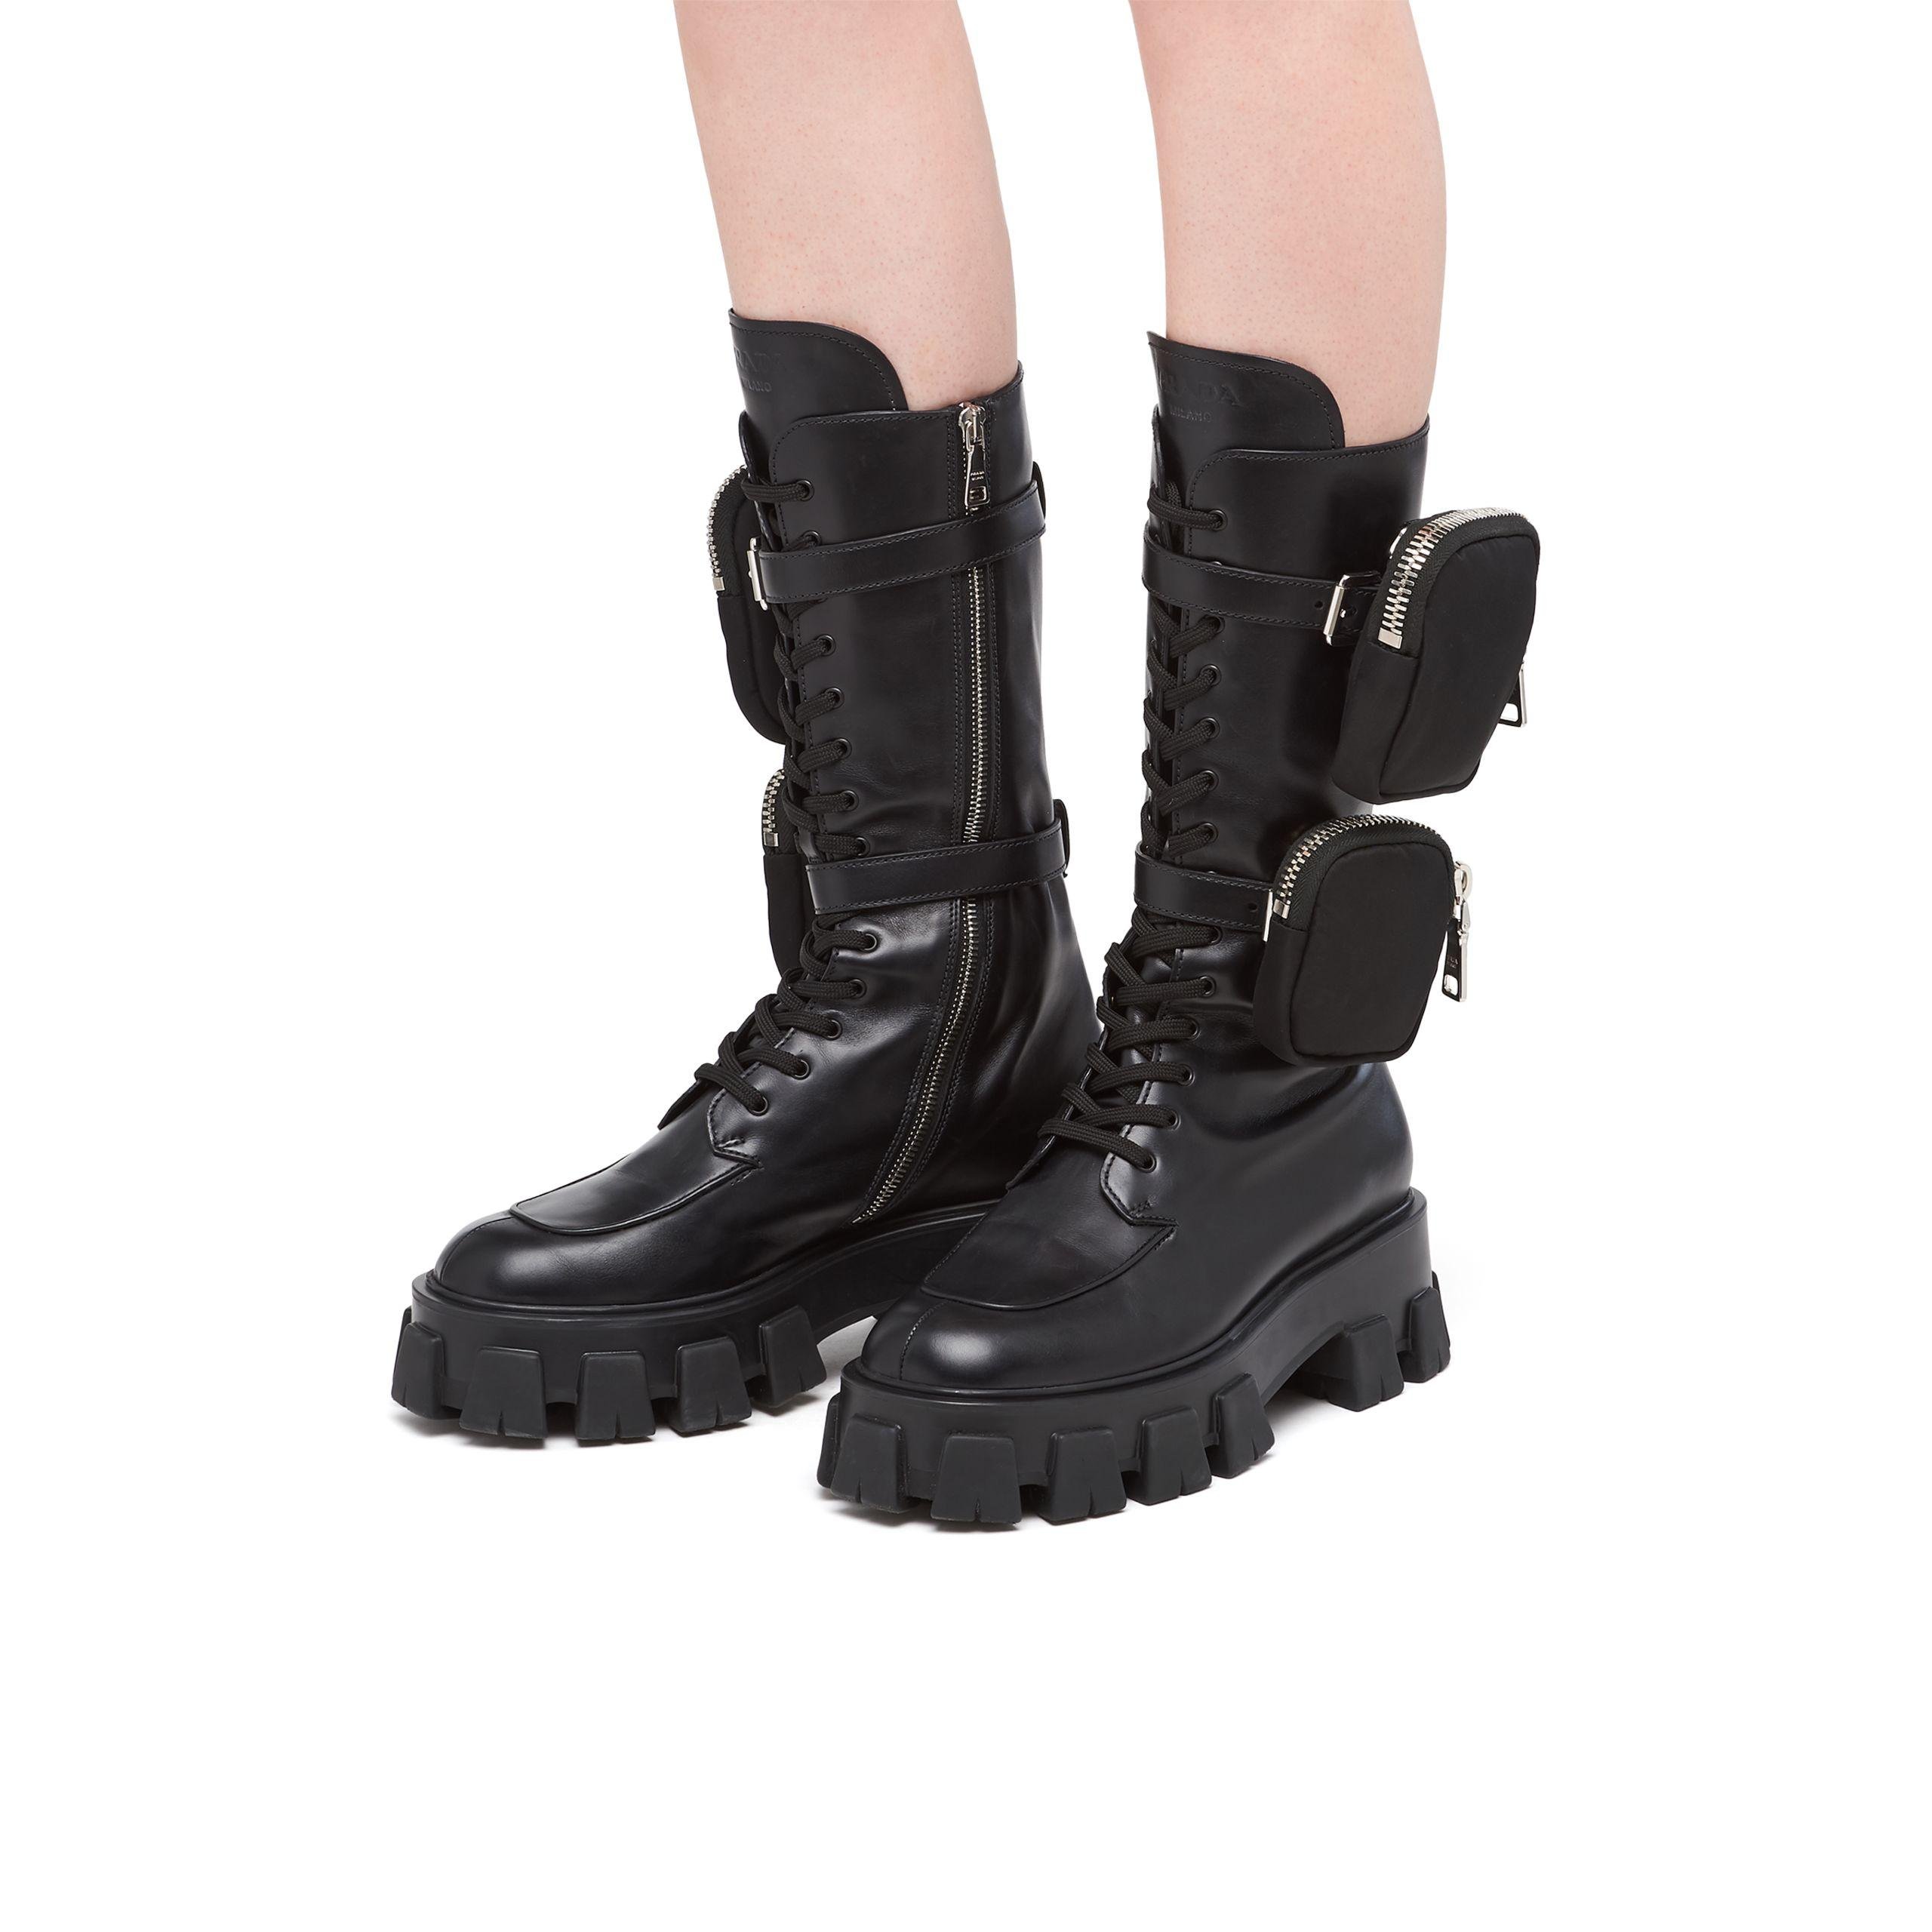 Prada Monolith Leather Boots in Black - Lyst